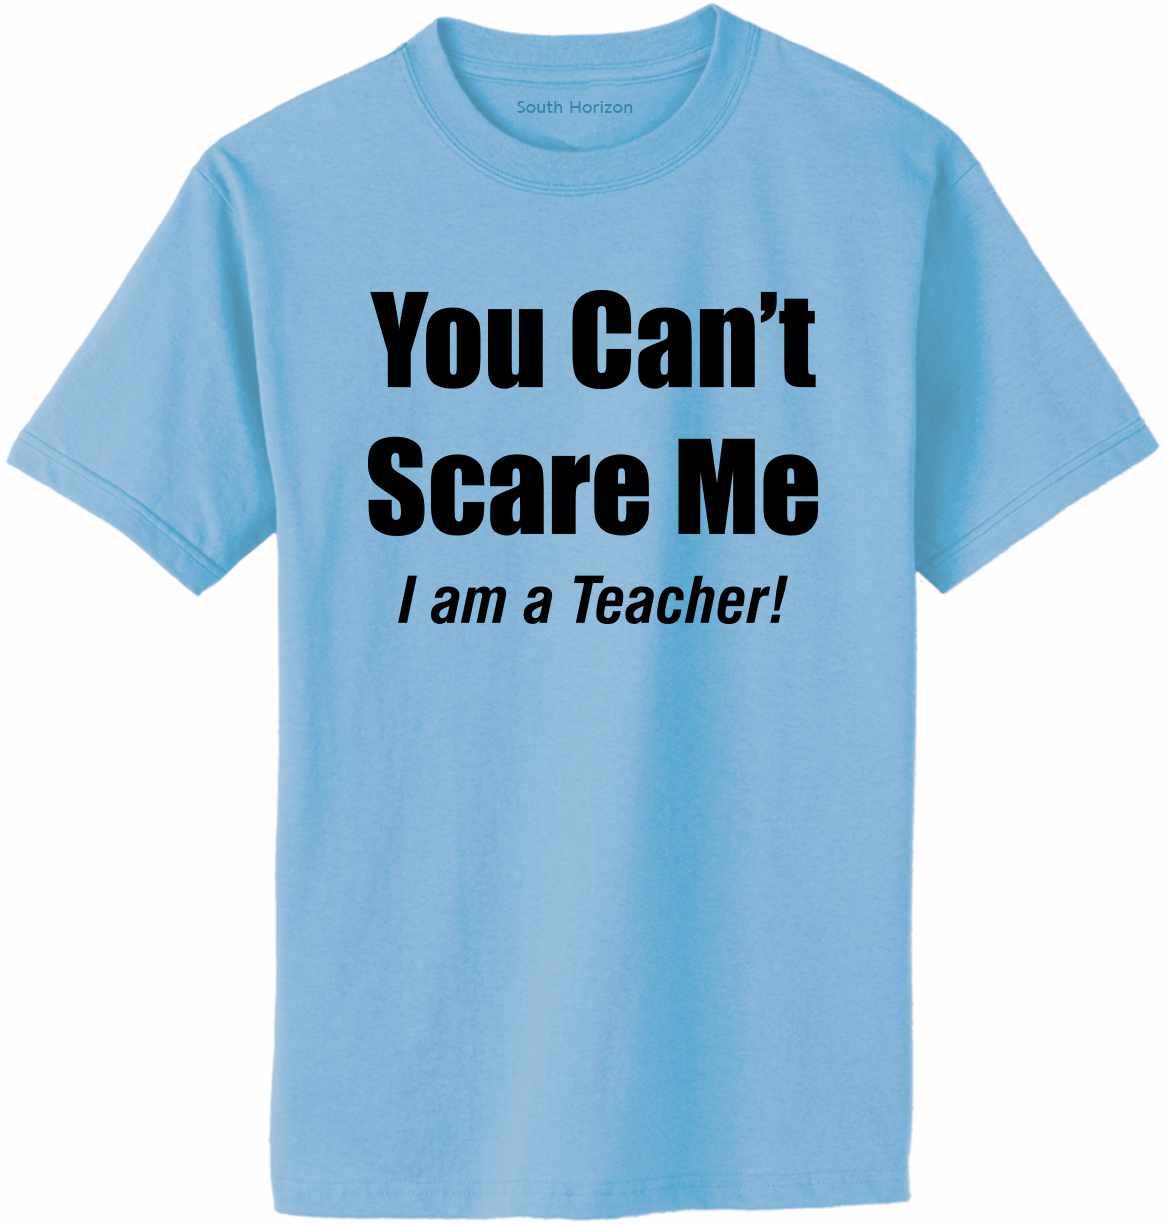 You Can't Scare Me, I am a Teacher Adult T-Shirt